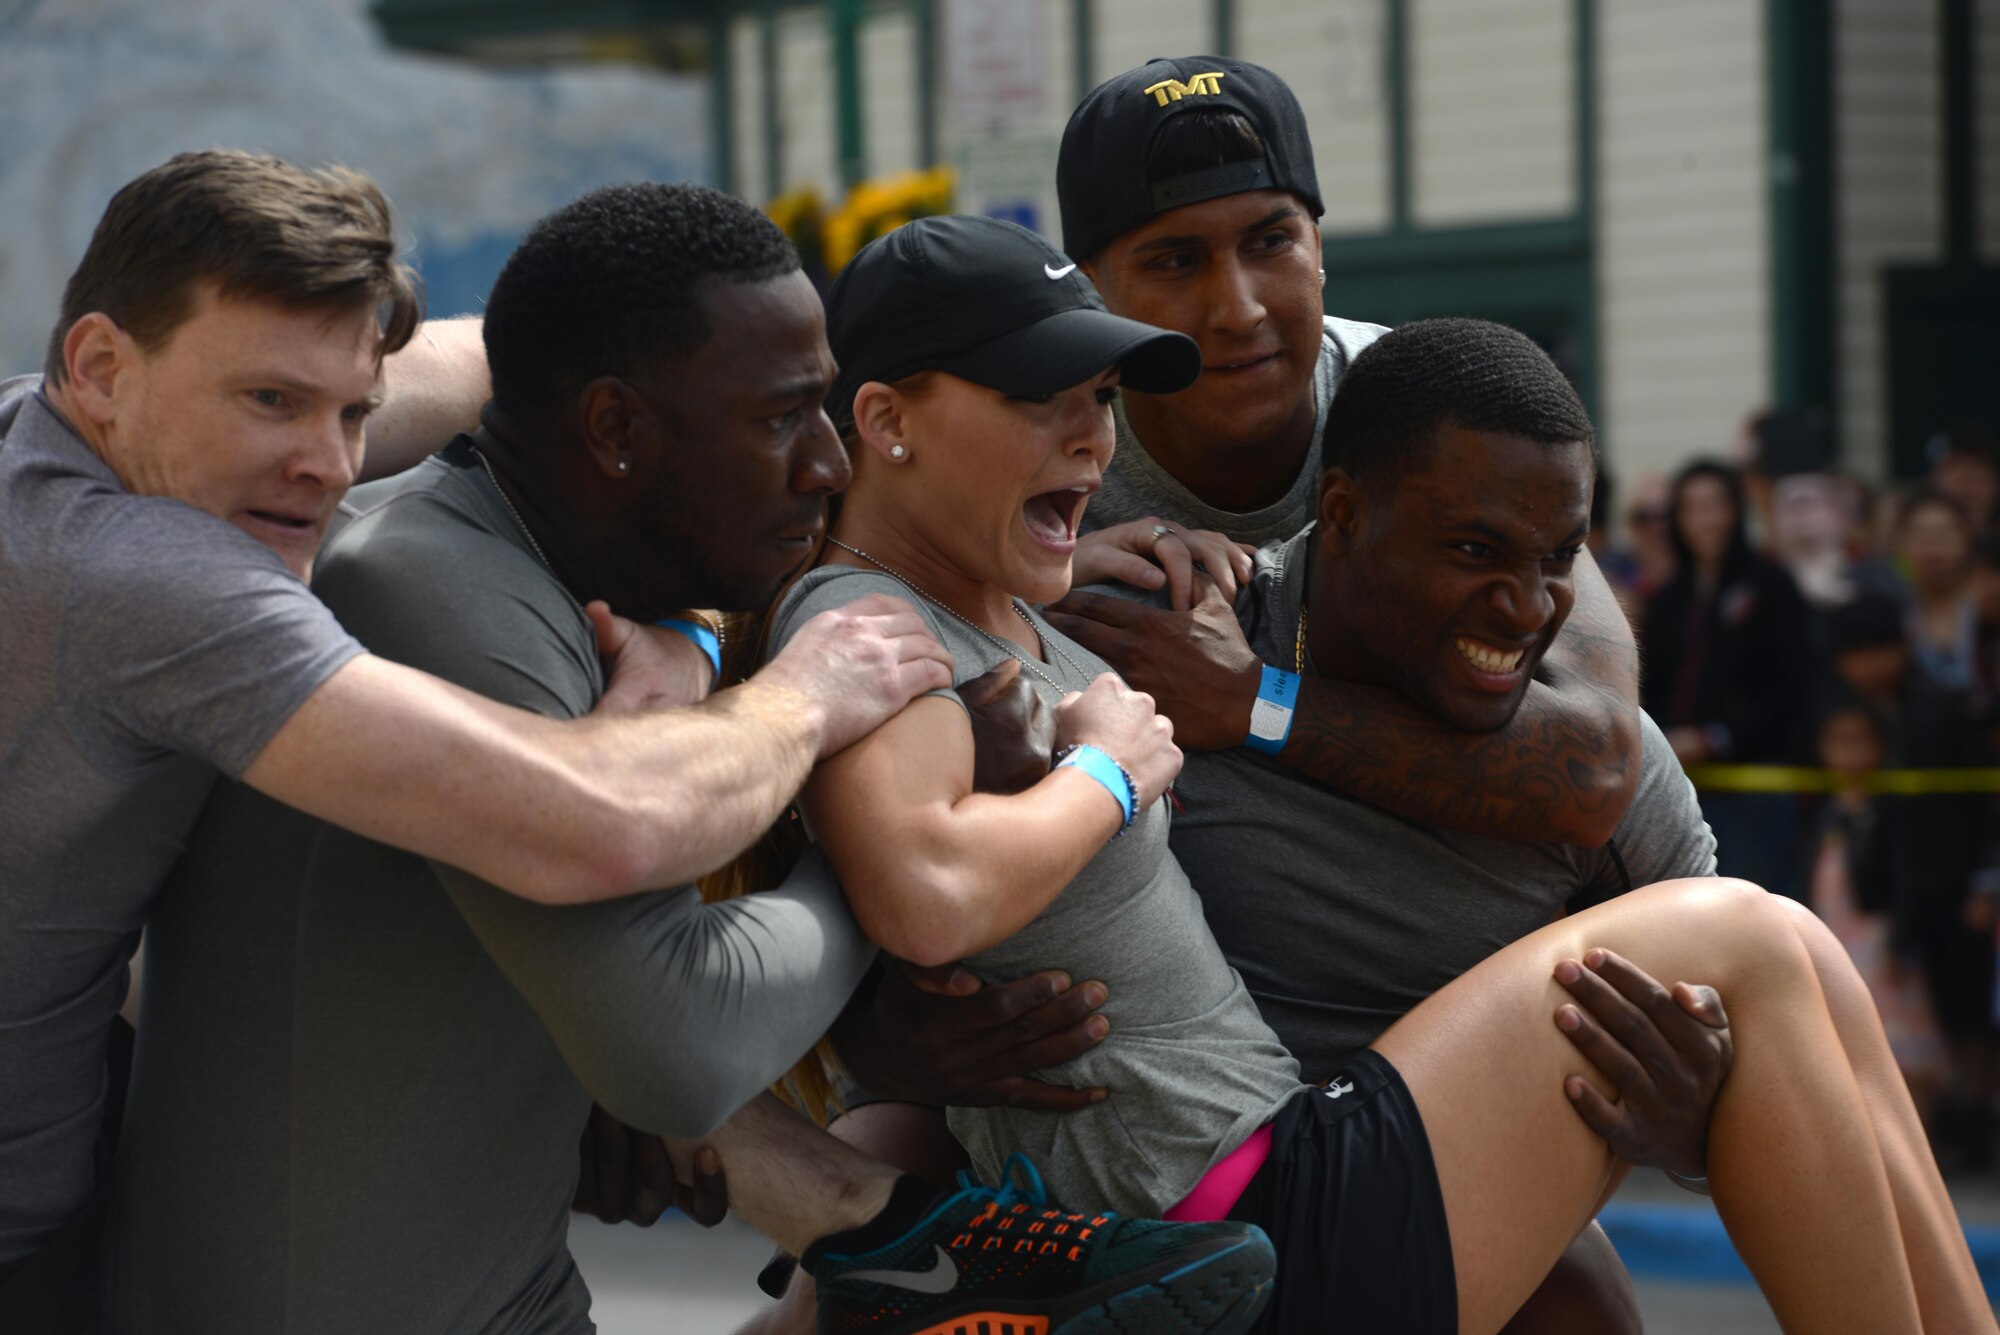 Five members of the ‘The Bios,’ from the Joint Base Elmendorf-Richardson Hospital, perform a body carry as part of the Hero Games during the Downtown Summer Solstice Festival in Anchorage, Alaska, June 18, 2016. The four-part relay consisted of sprinting, weaving through cones, hula-hooping and the infamous body carry. The Hero Games is a friendly competition between Alaska’s first responders with challenges that require balance, strength and teamwork. (U.S. Air Force photo Airman 1st Class Christopher R. Morales)